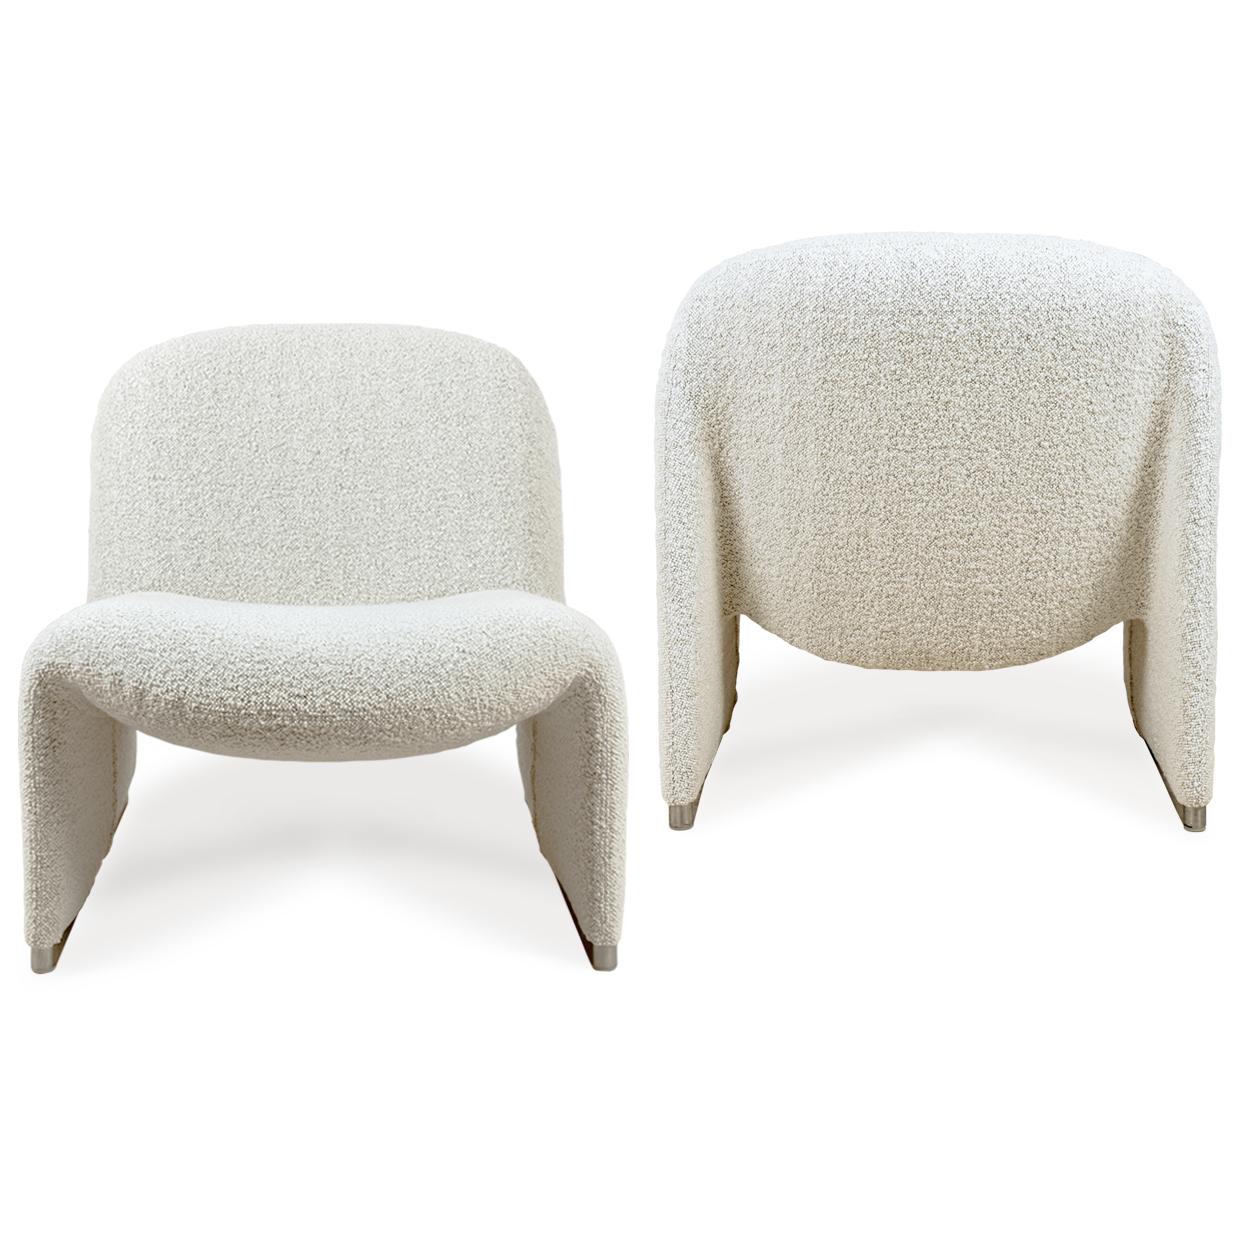 Italian Alky Piretti Chairs, New Upholstered with Fabric Dedar, Italy